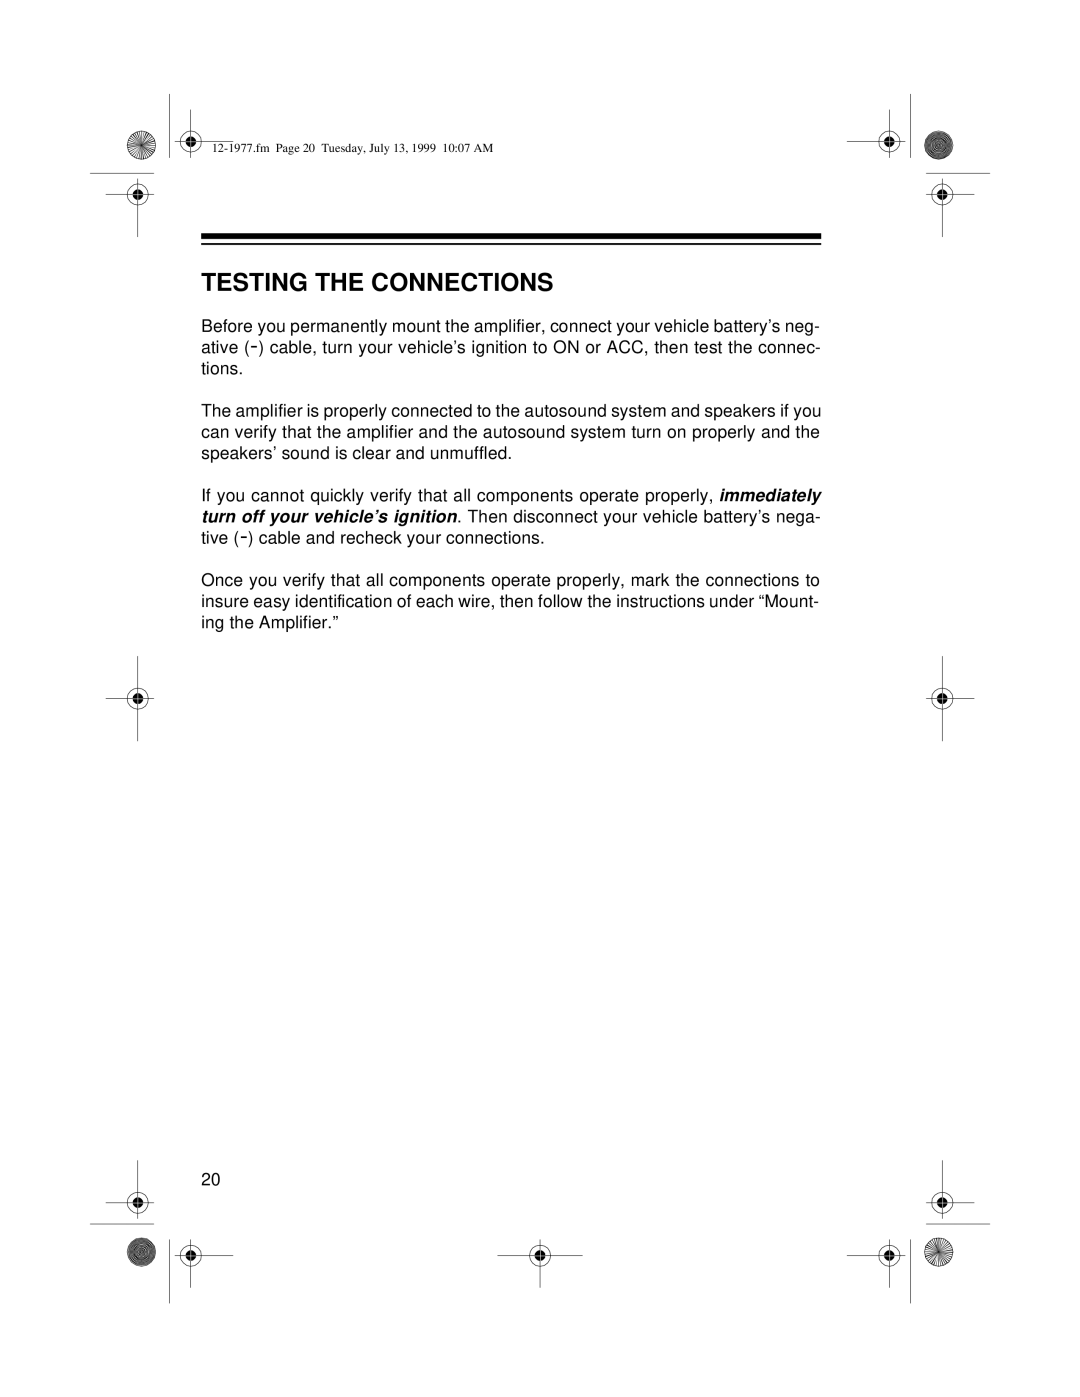 Radio Shack 85 owner manual Testing The Connections 